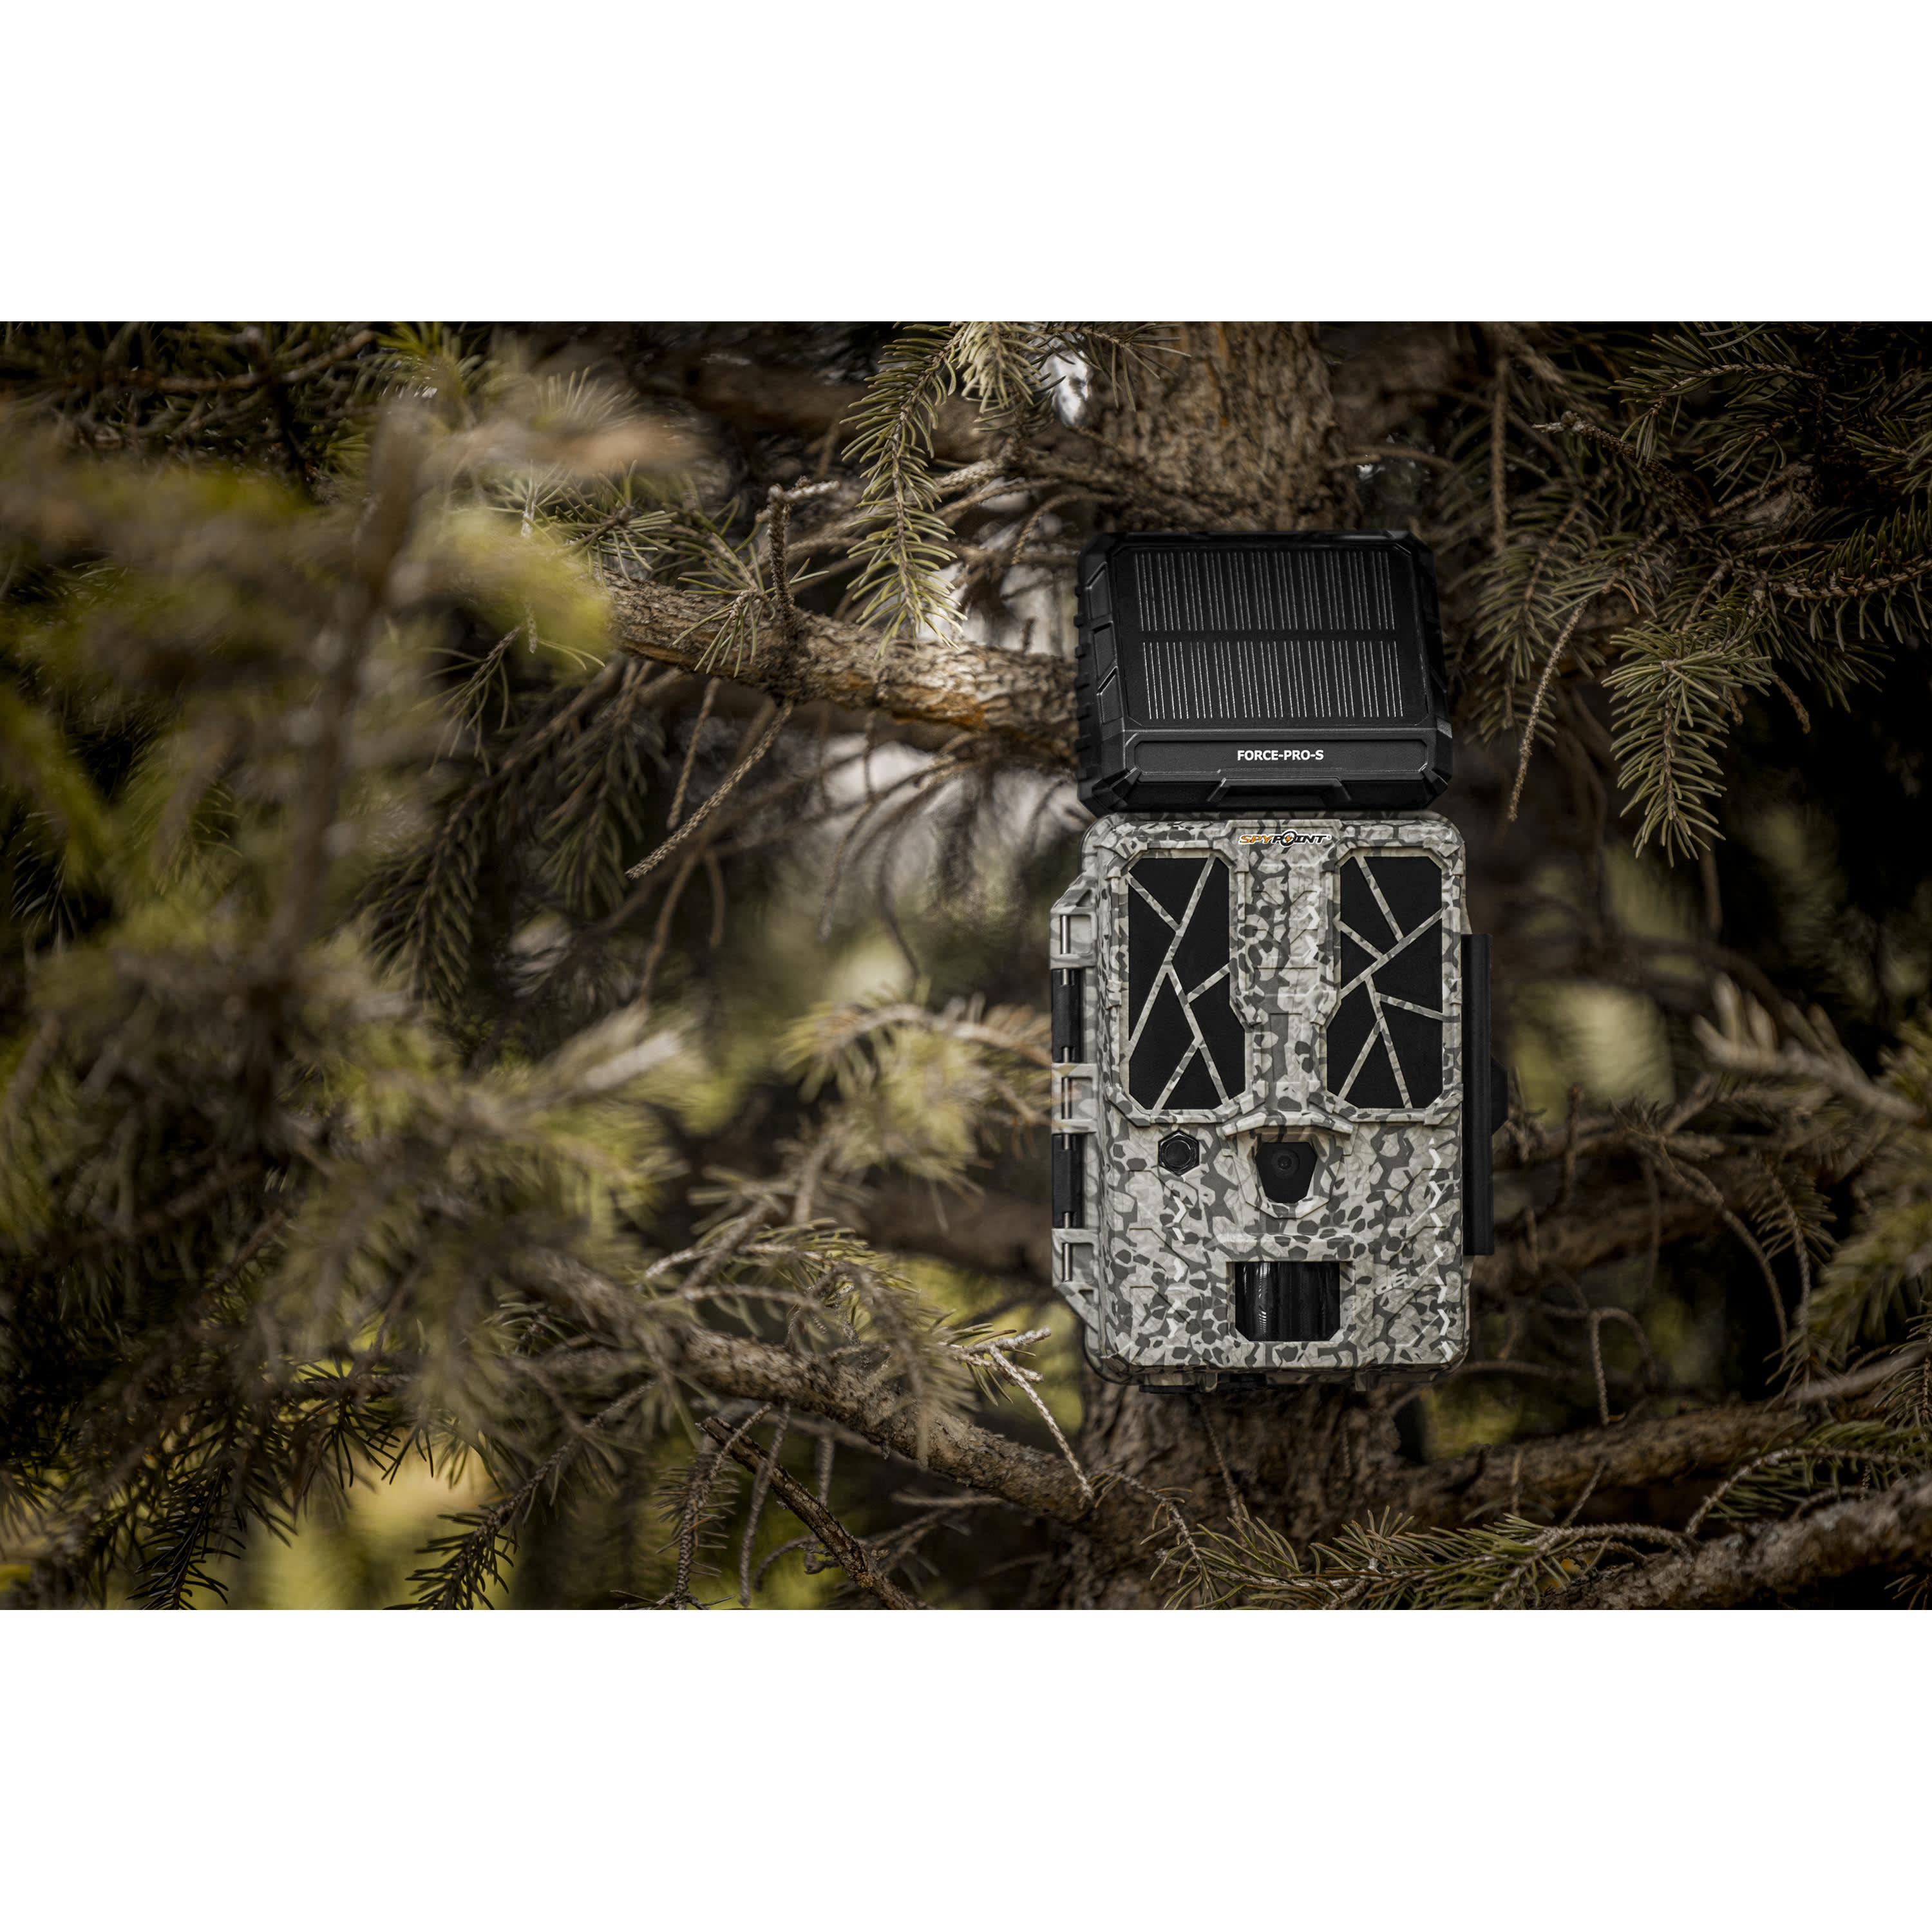 SPYPOINT® FORCE-PRO-S Trail Camera